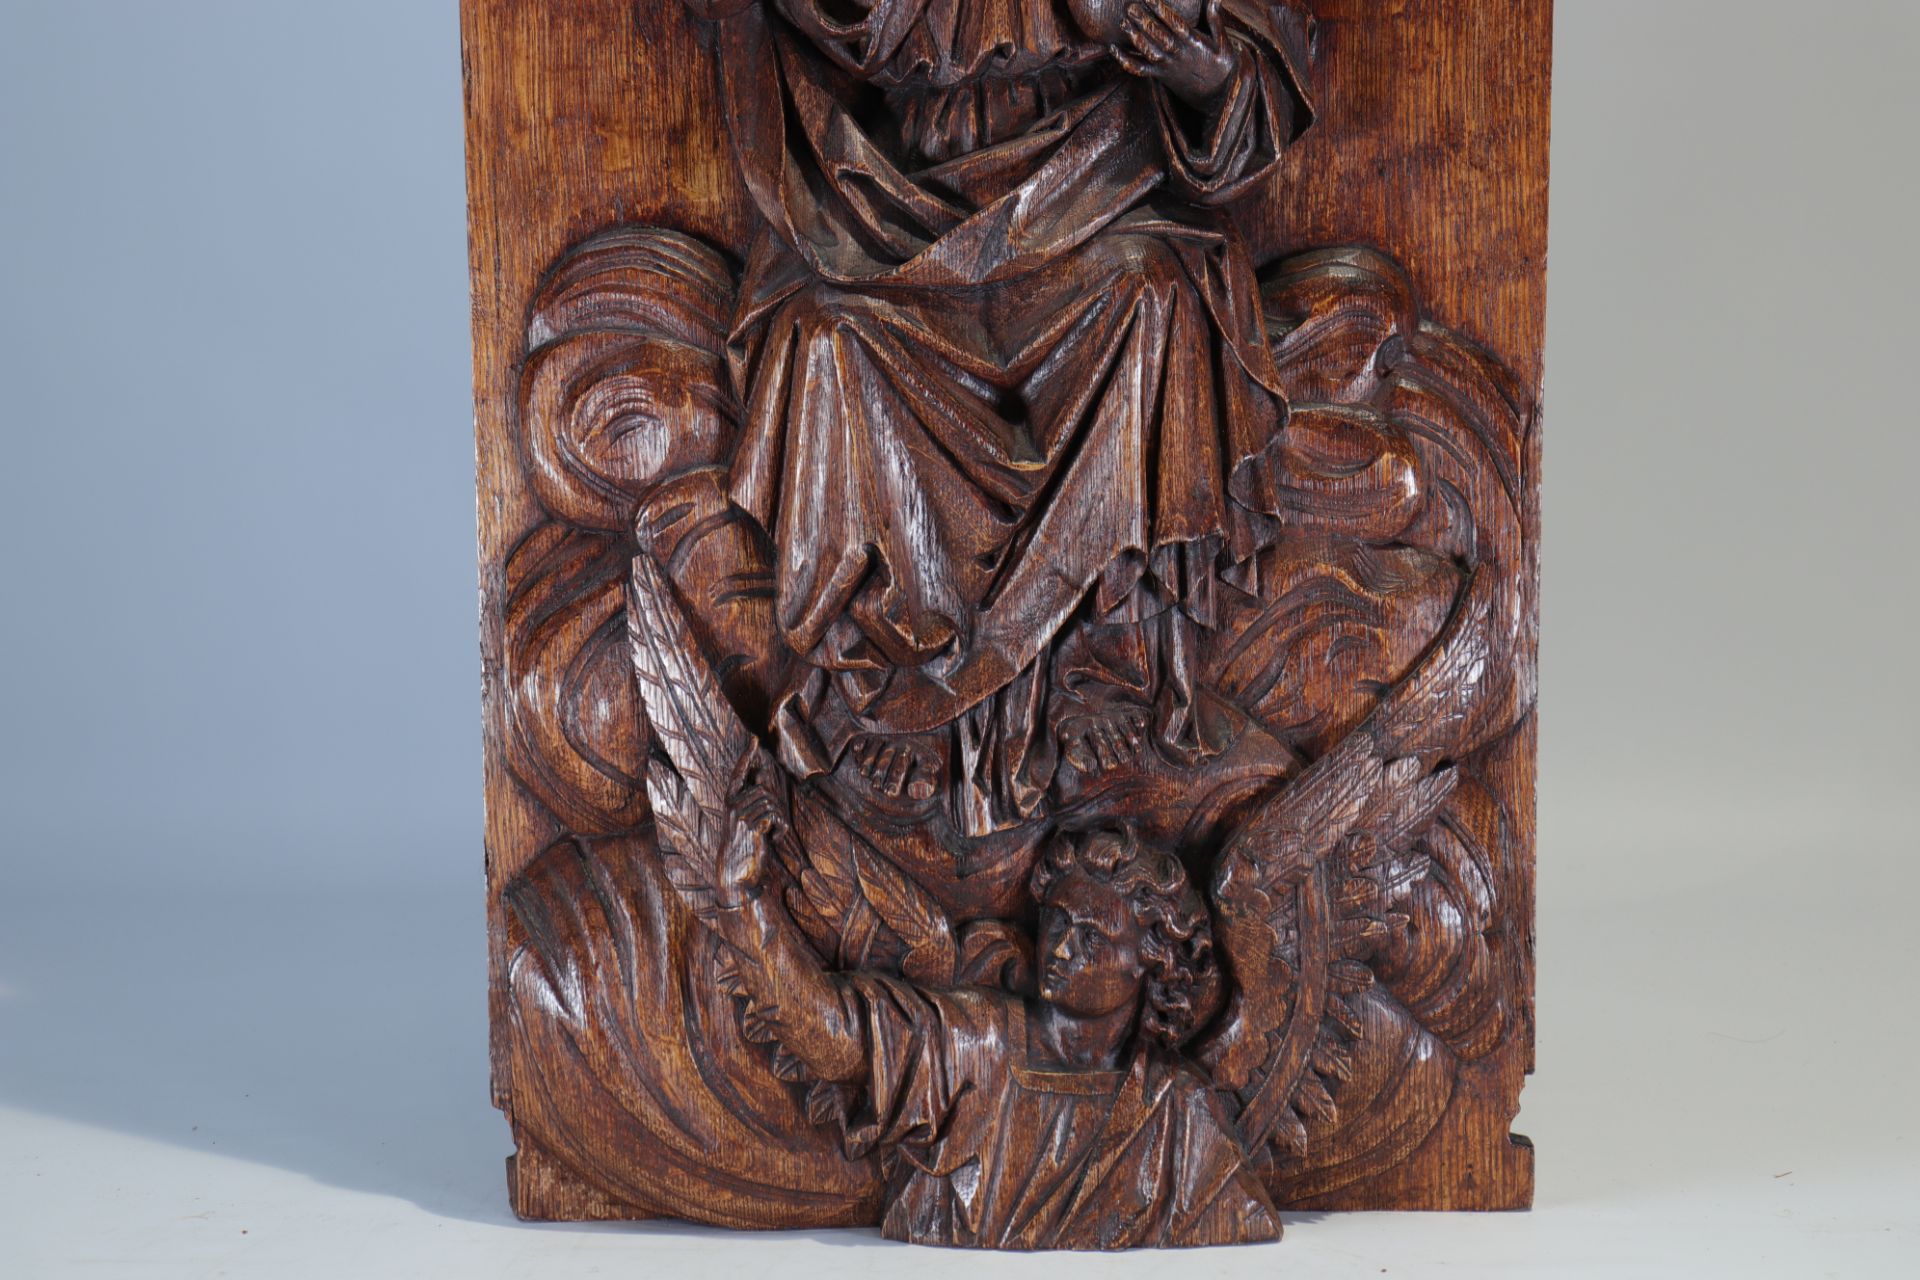 Carved wood bas-relief depicting a religious scene from the 18th century - Image 3 of 3